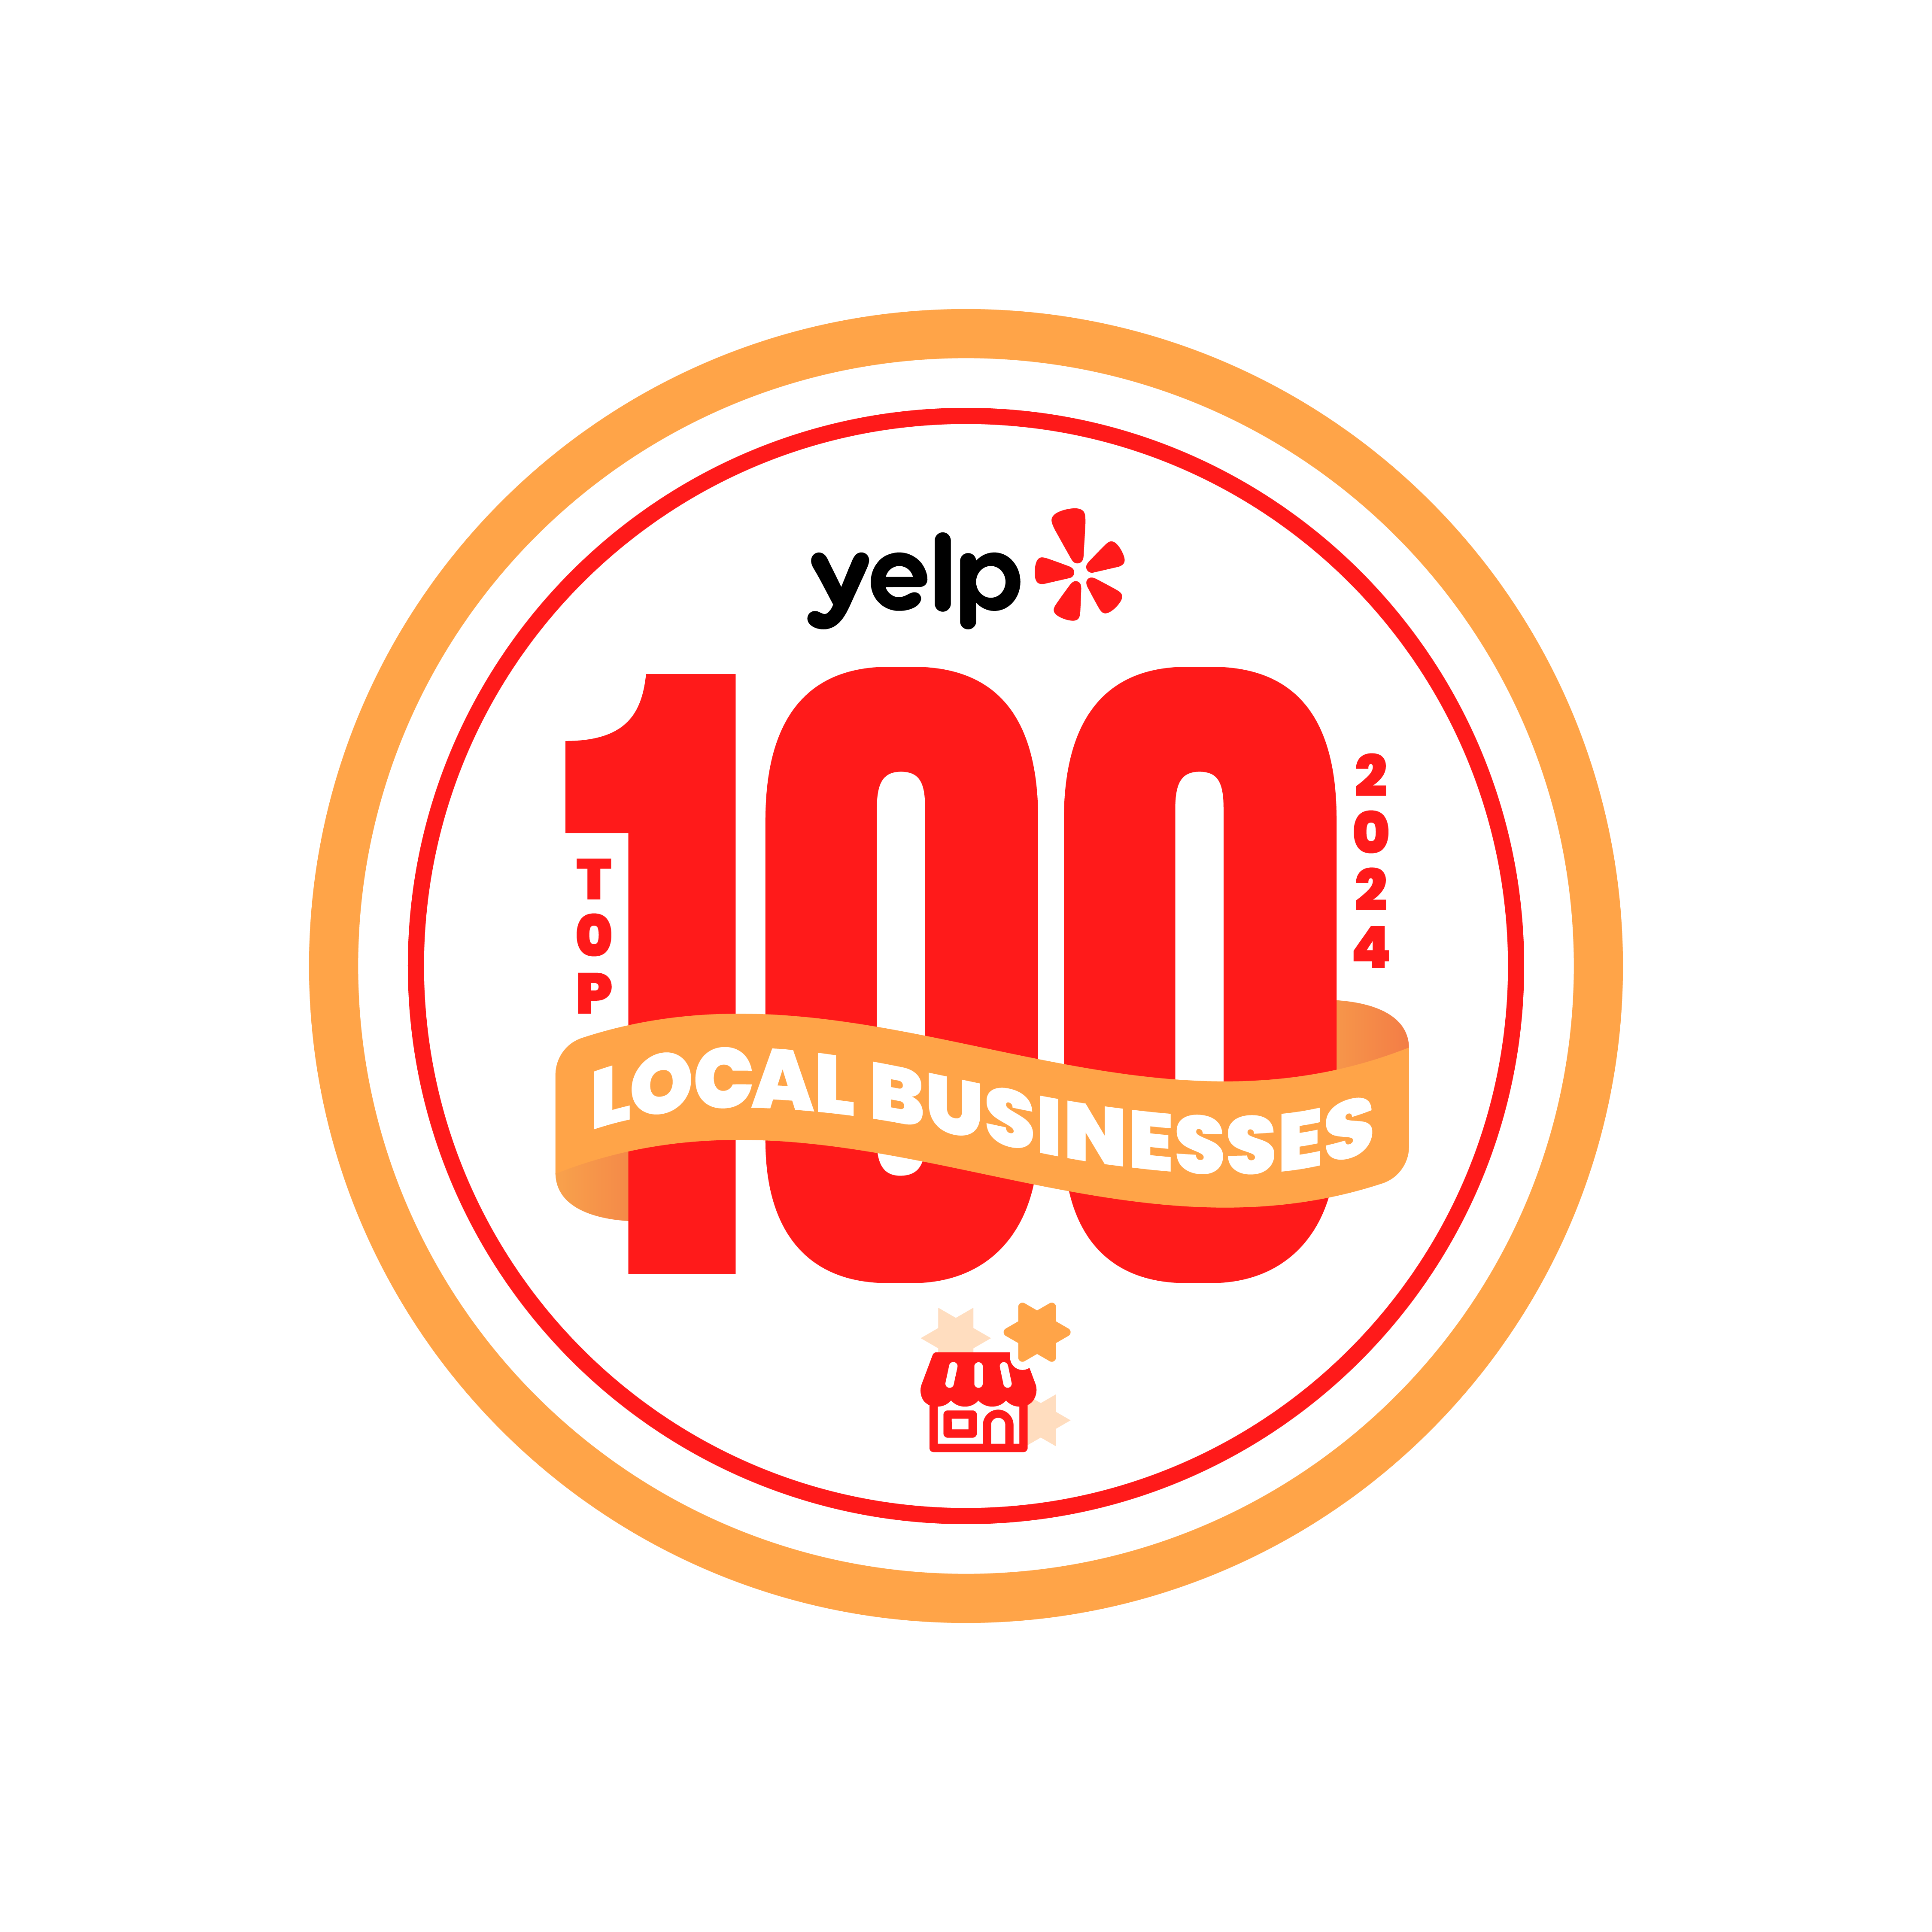 Yelps top 100